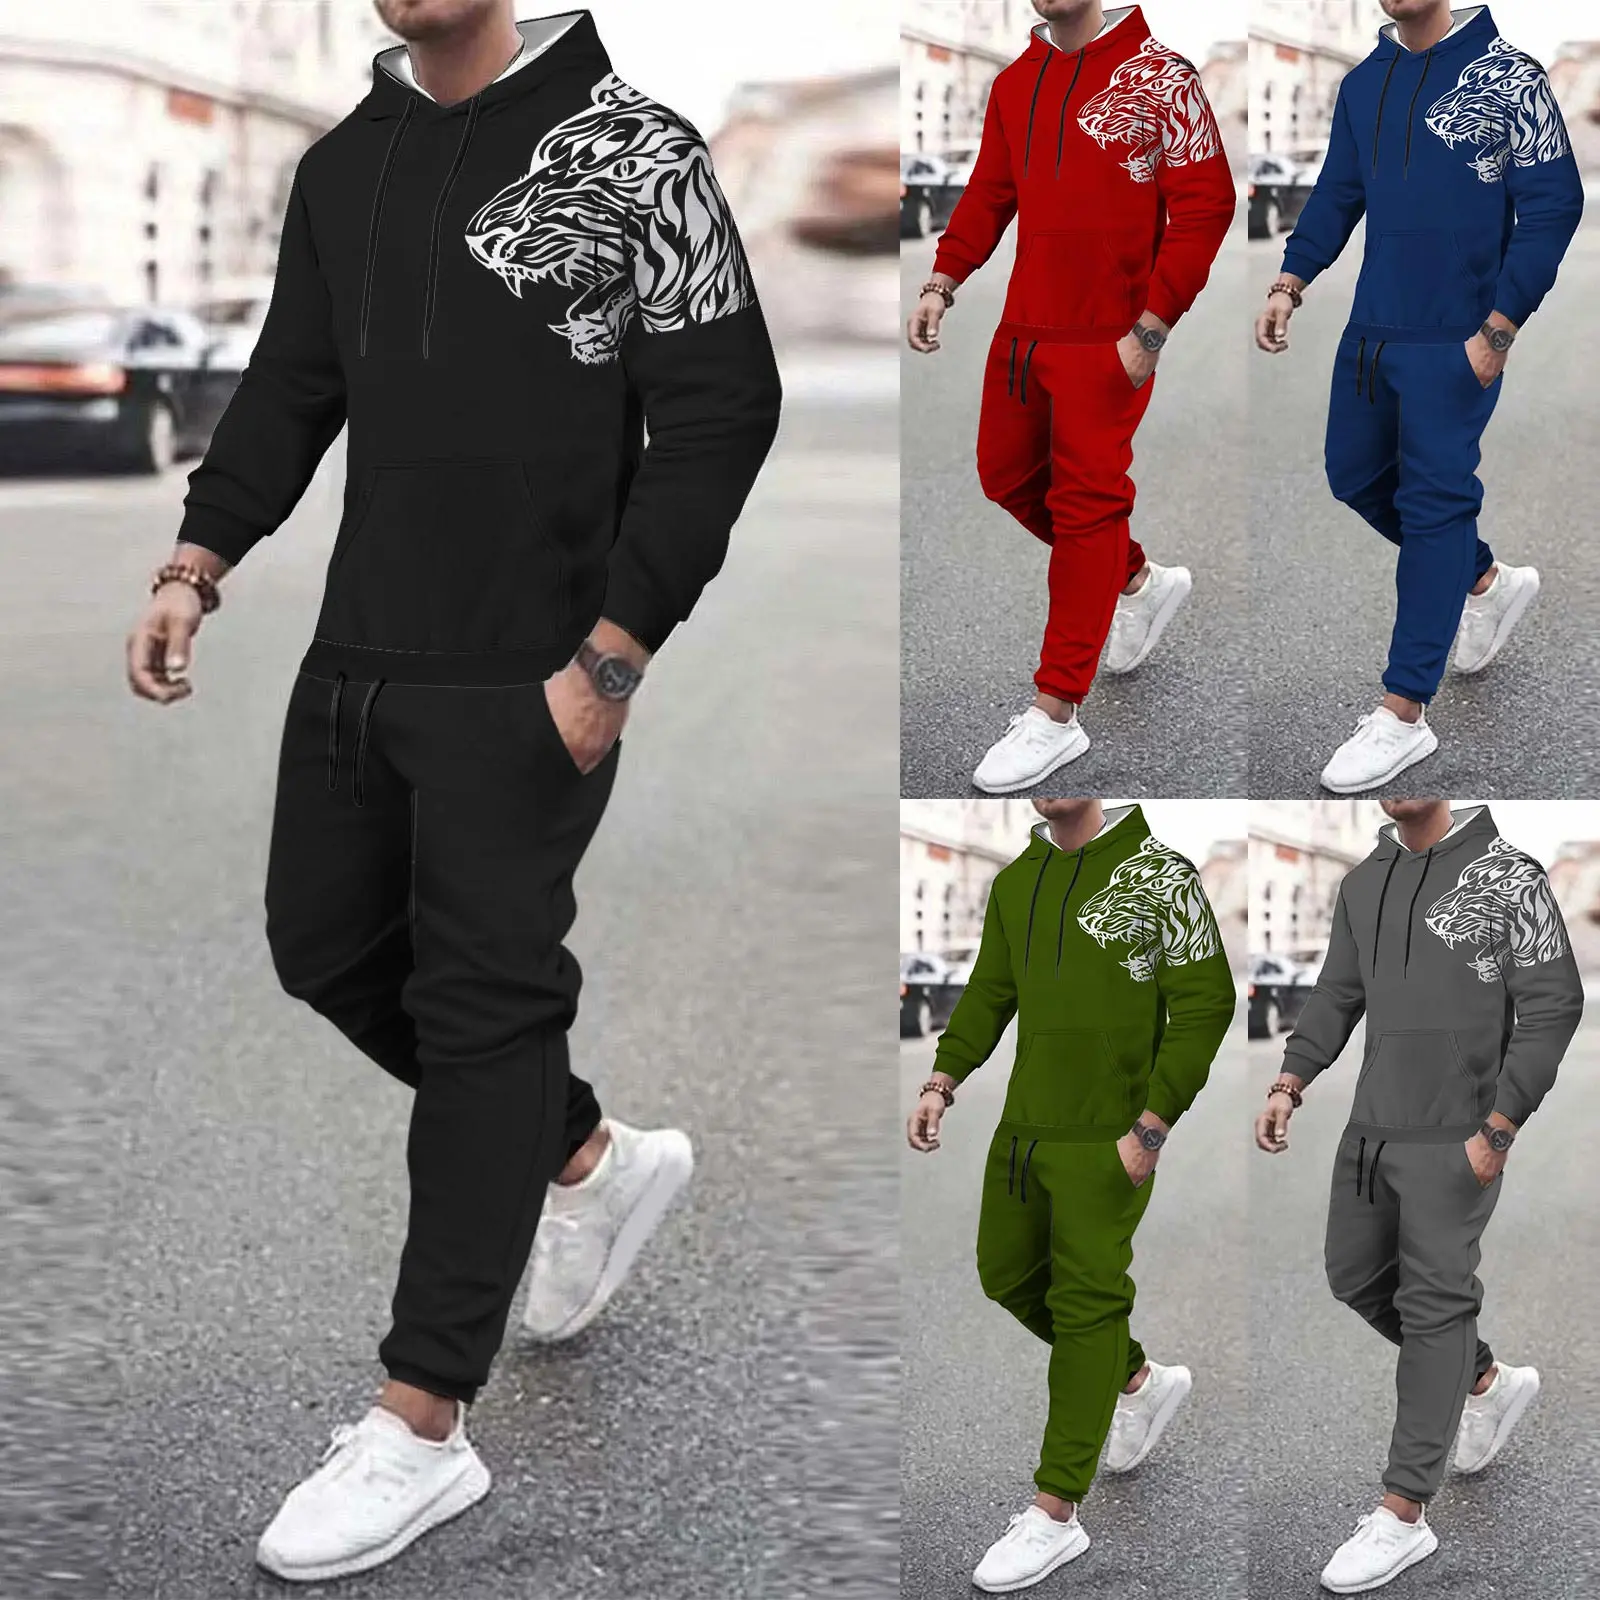 Leopard print Hot Sale Mens New Tracksuit Hoodies and Trousers High Quality Male Dialy Casual Sports Jogging Set Autumn Outfits